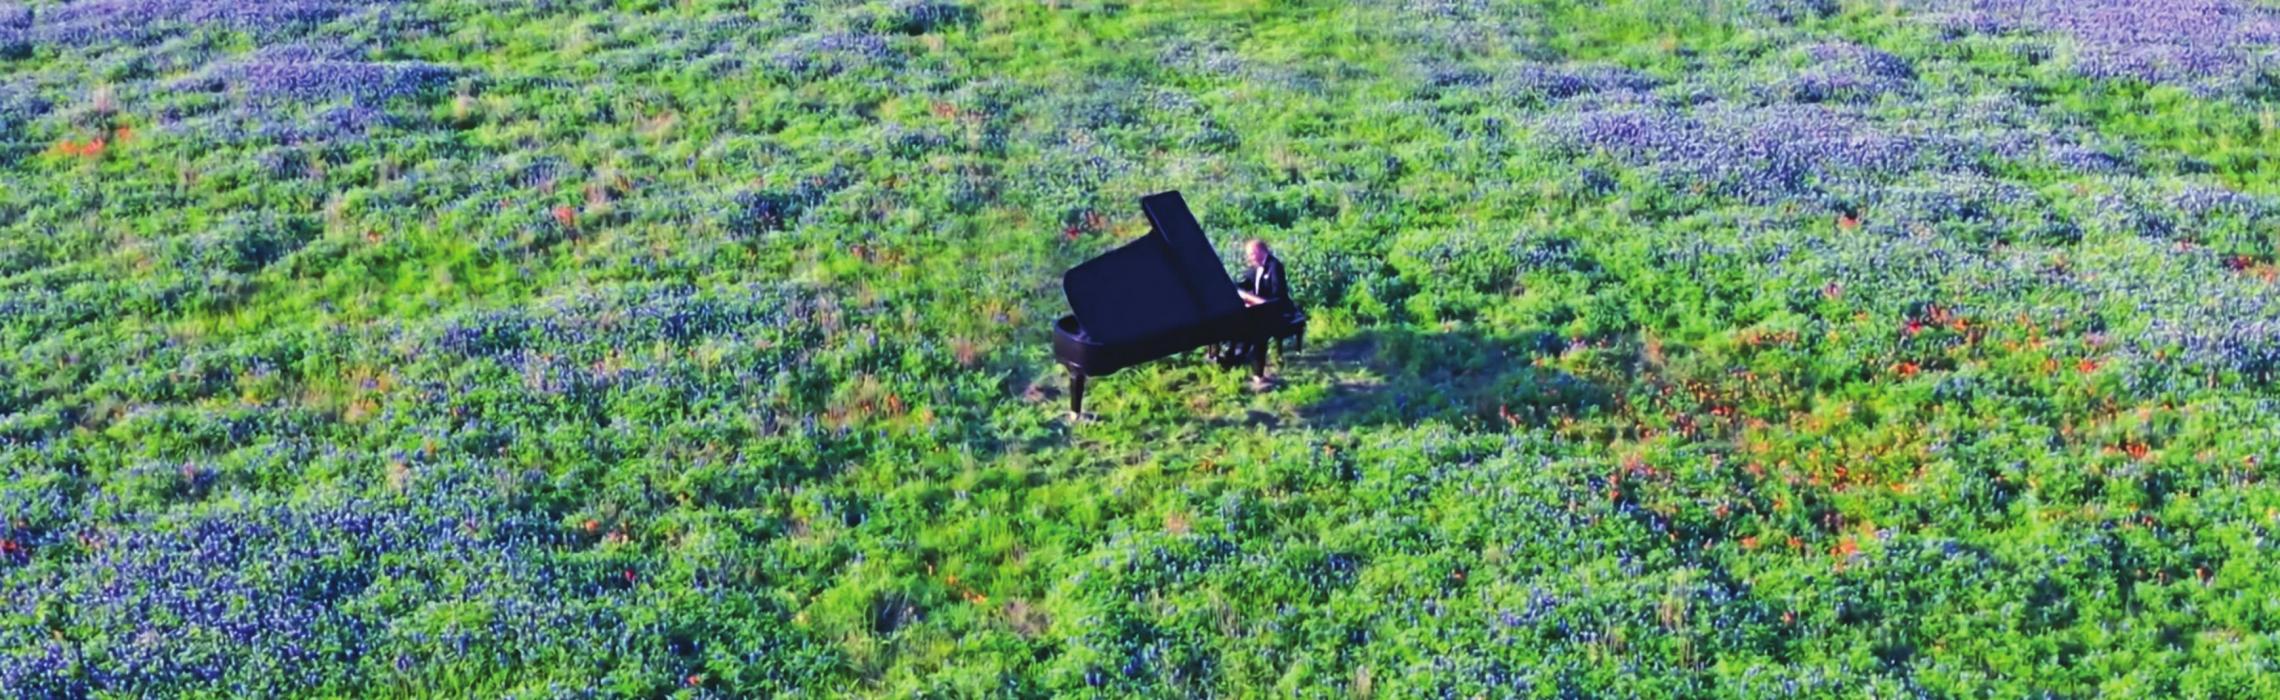 Since the pandemic started, Round Top Festival Institute has been reinventing itself via online, YouTube and video performances. It all started this past March with a concert piano in a bluebonnet field by James Dick, Round Top Festival Institute Founder. Photo by Don Teague